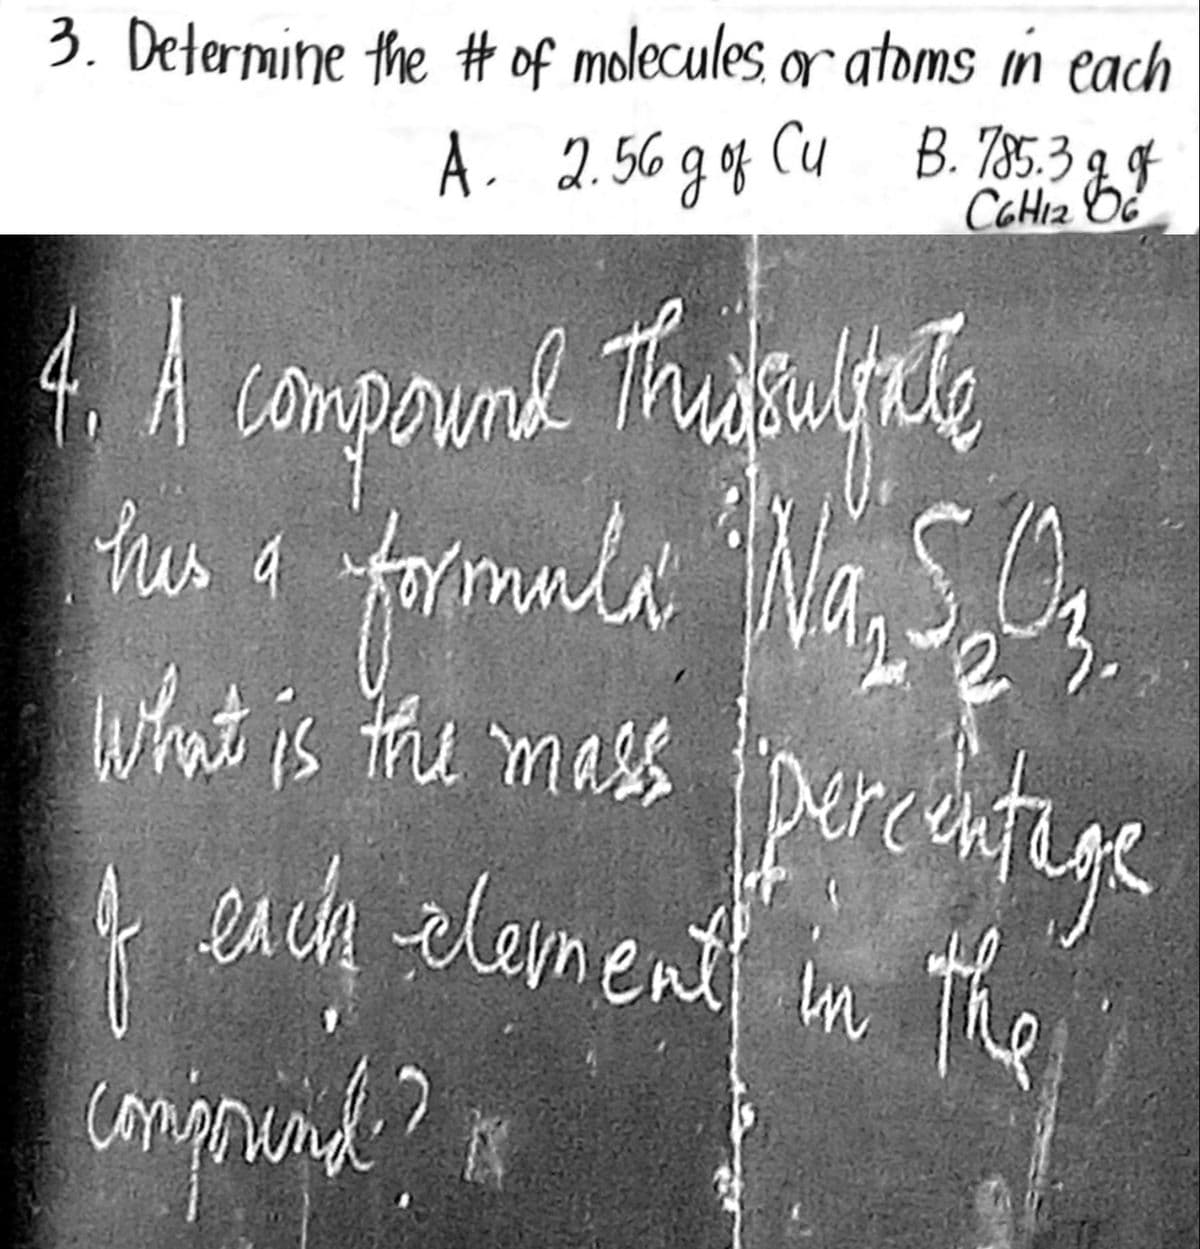 3. Determine the # of molecules or atoms in each
A. 2.56 g of Cu B. 785.3 8 og
4. A compound this sulfate
this a formula "Wa, S₂O₂.
3.
What is the mass percentage
of each element in the
comporund?
K